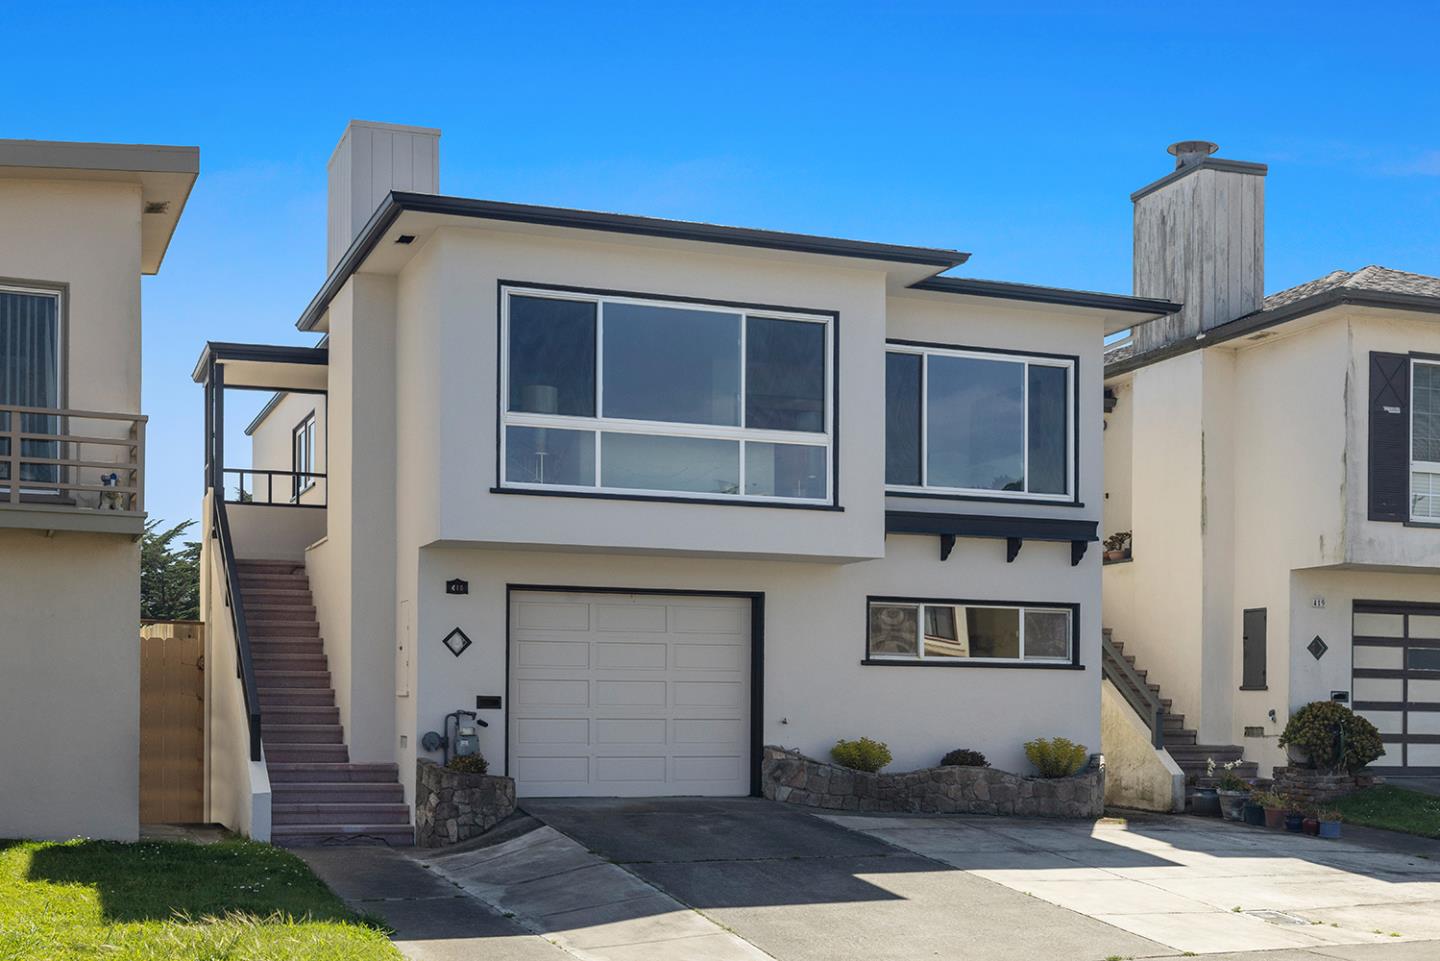 Photo of 415 Skyline Dr in Daly City, CA